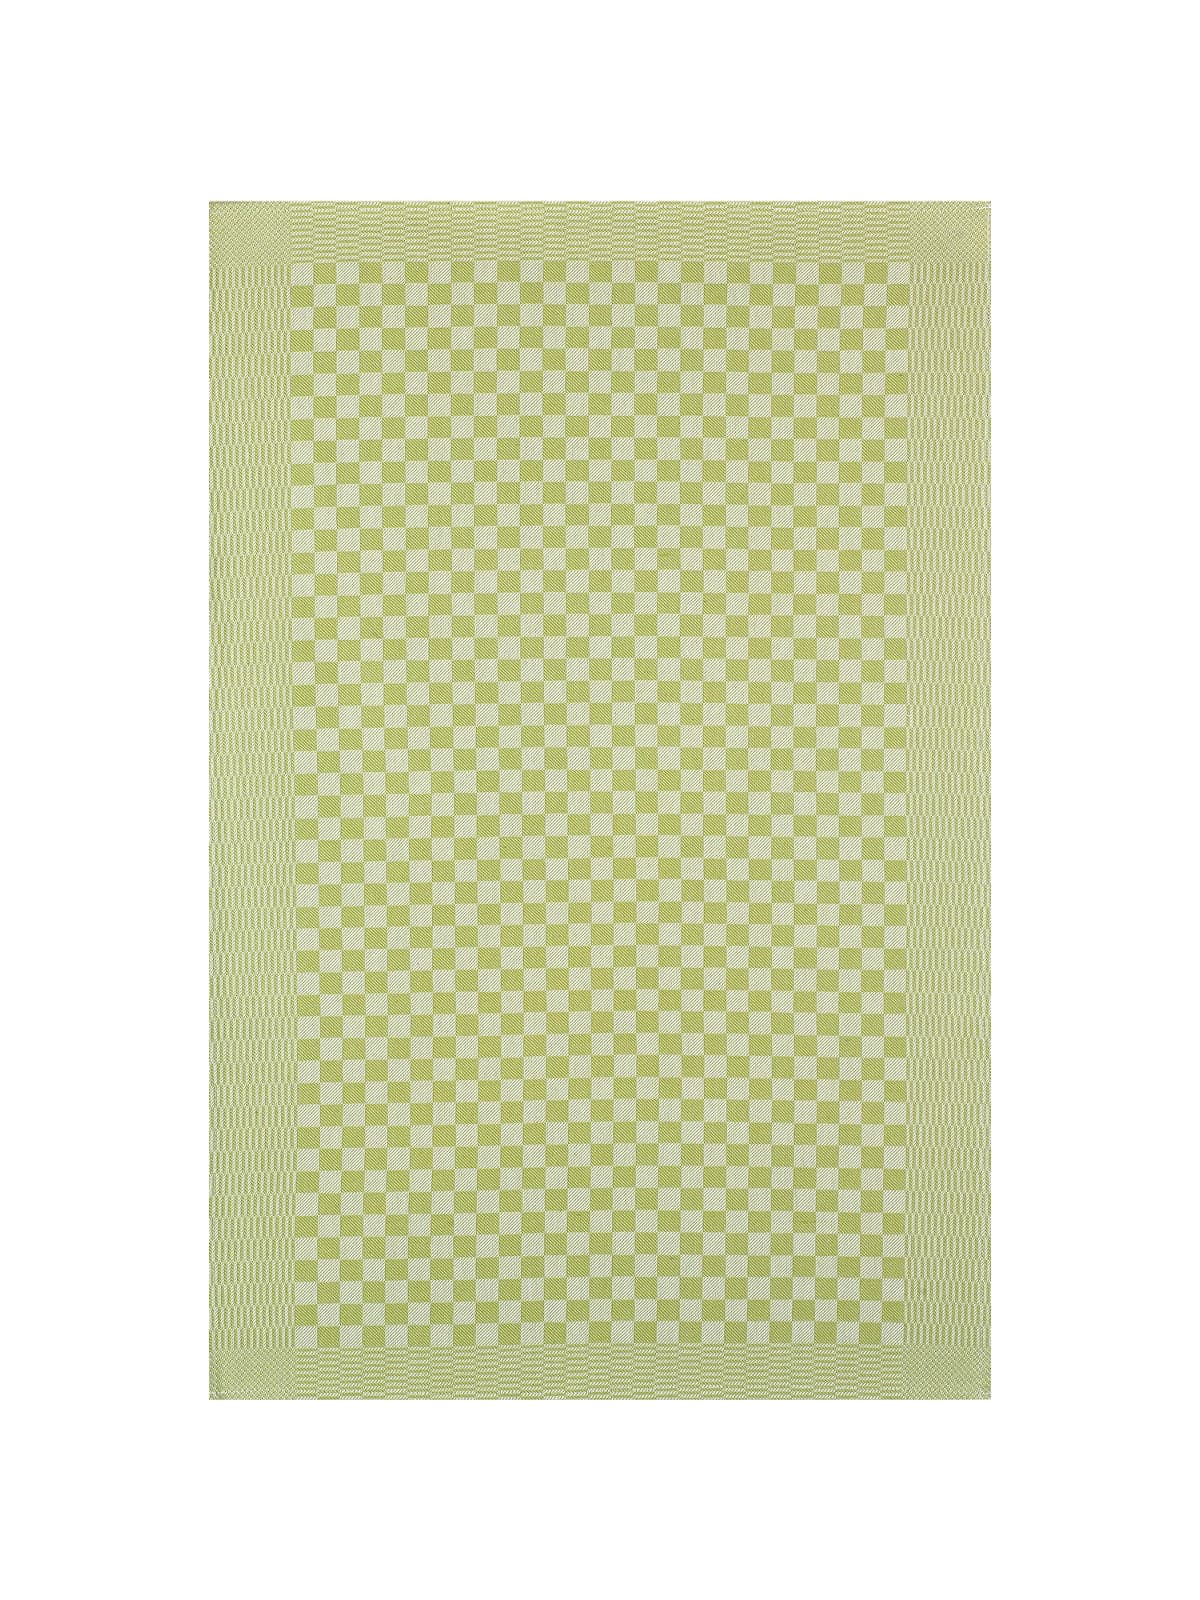 Pit Towel Green - 12 Pcs by  Kitchen & Table Linens.